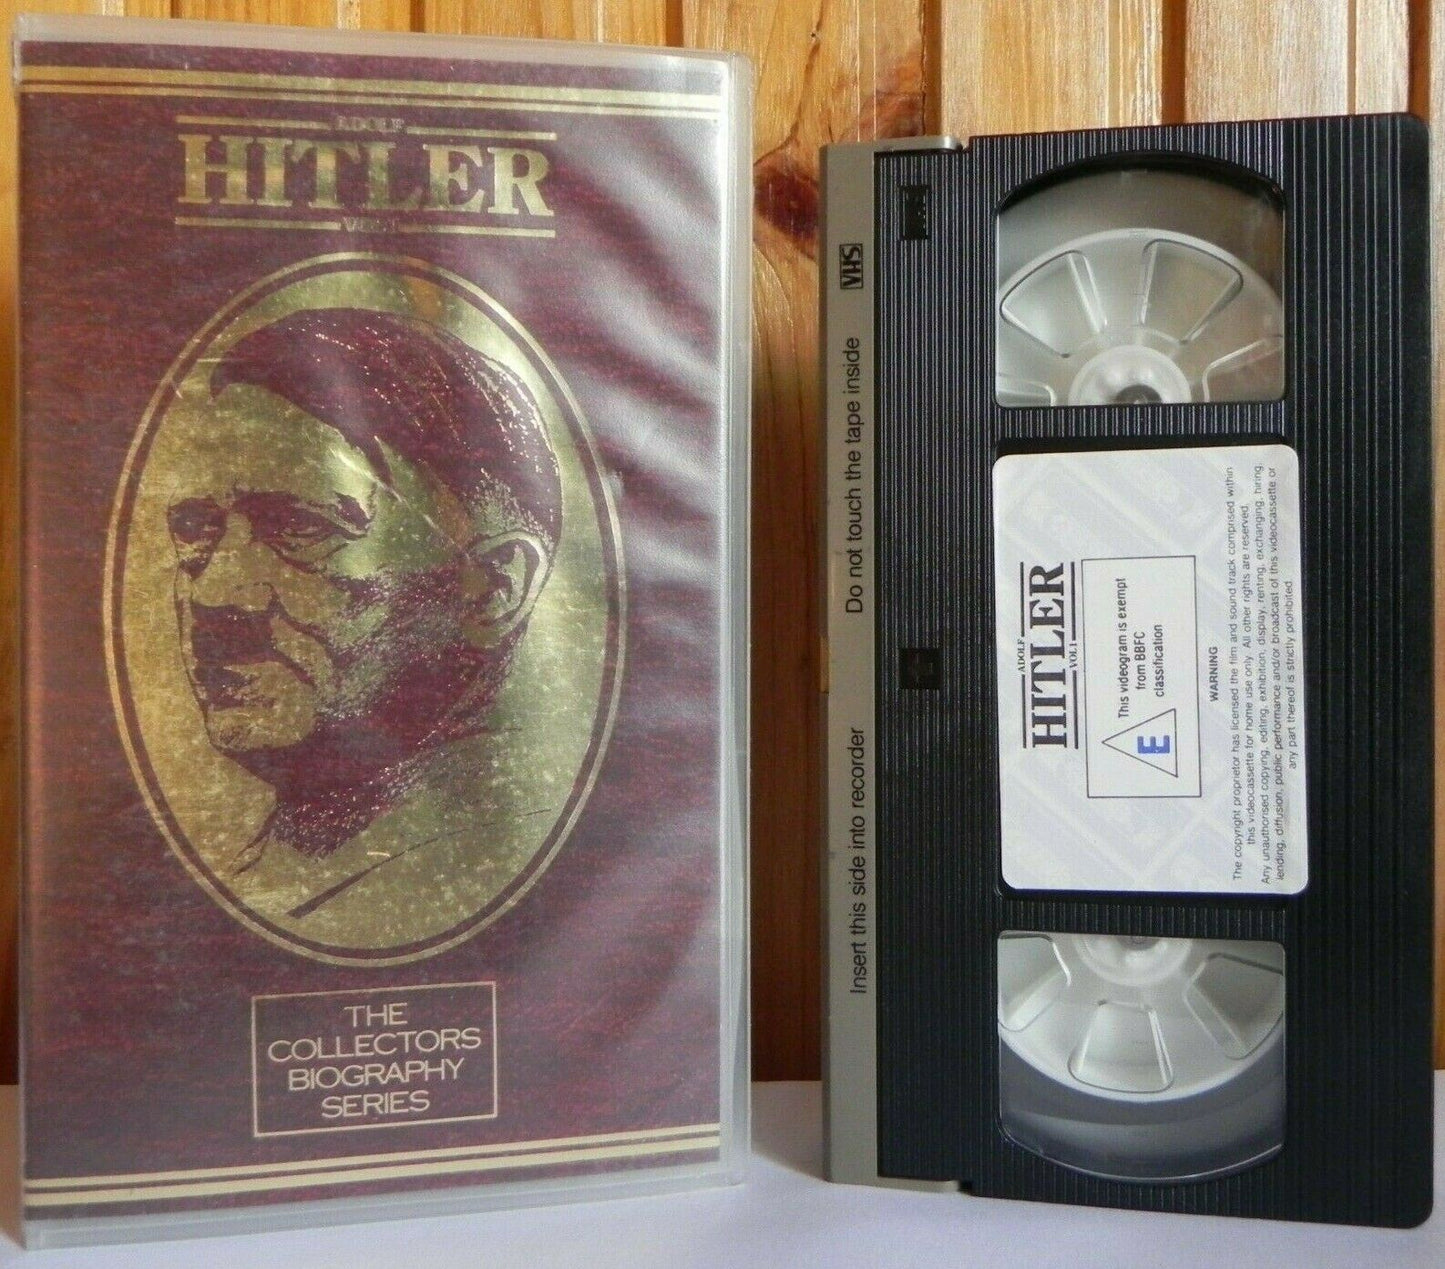 Adolf Hitler: Vol.1 - The Collectors Biography Series - Documentary - Pal VHS-